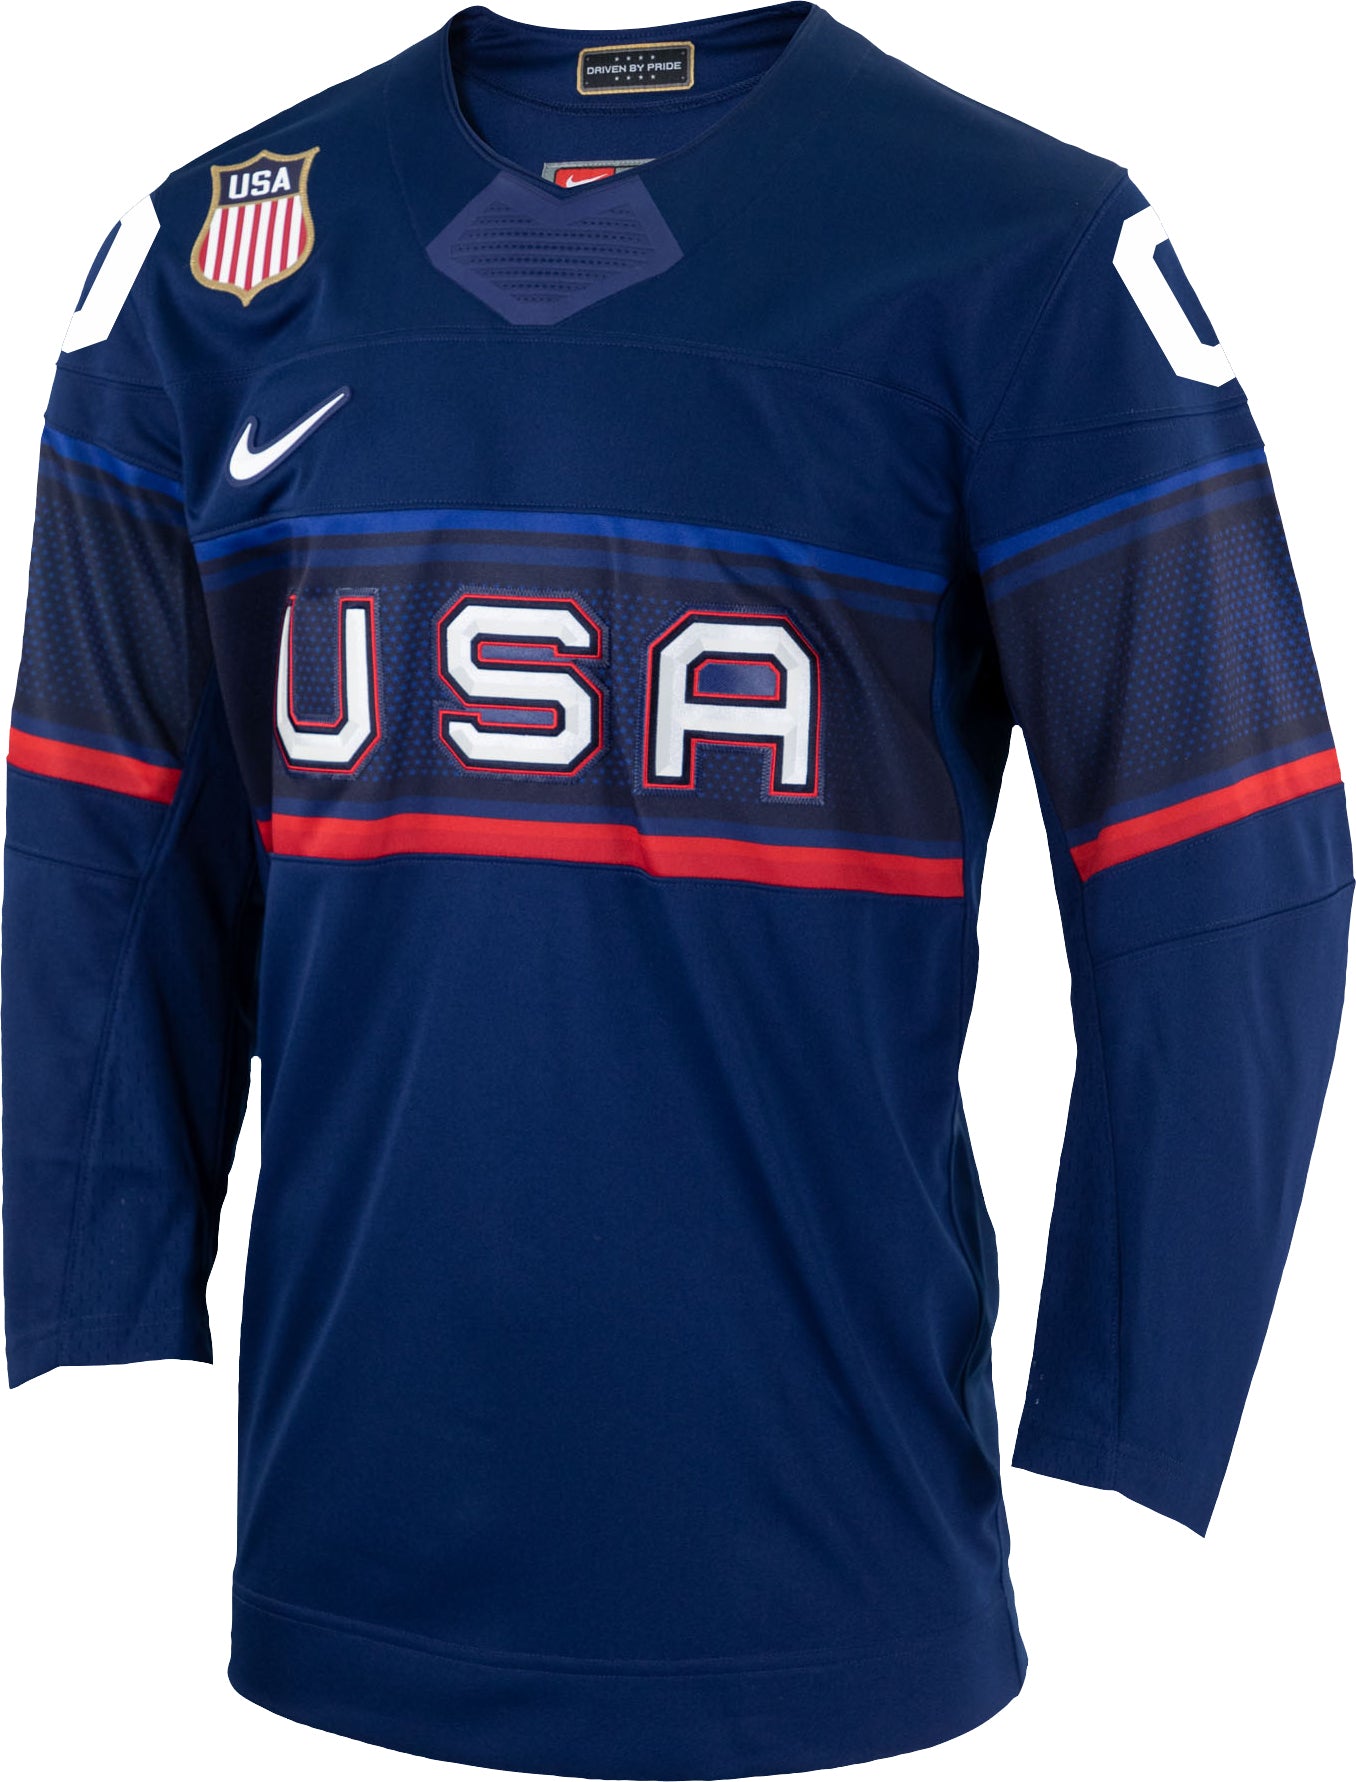 Nike USA Hockey Olympic 2022 Home 'White' Jersey Men's Sizes S-L